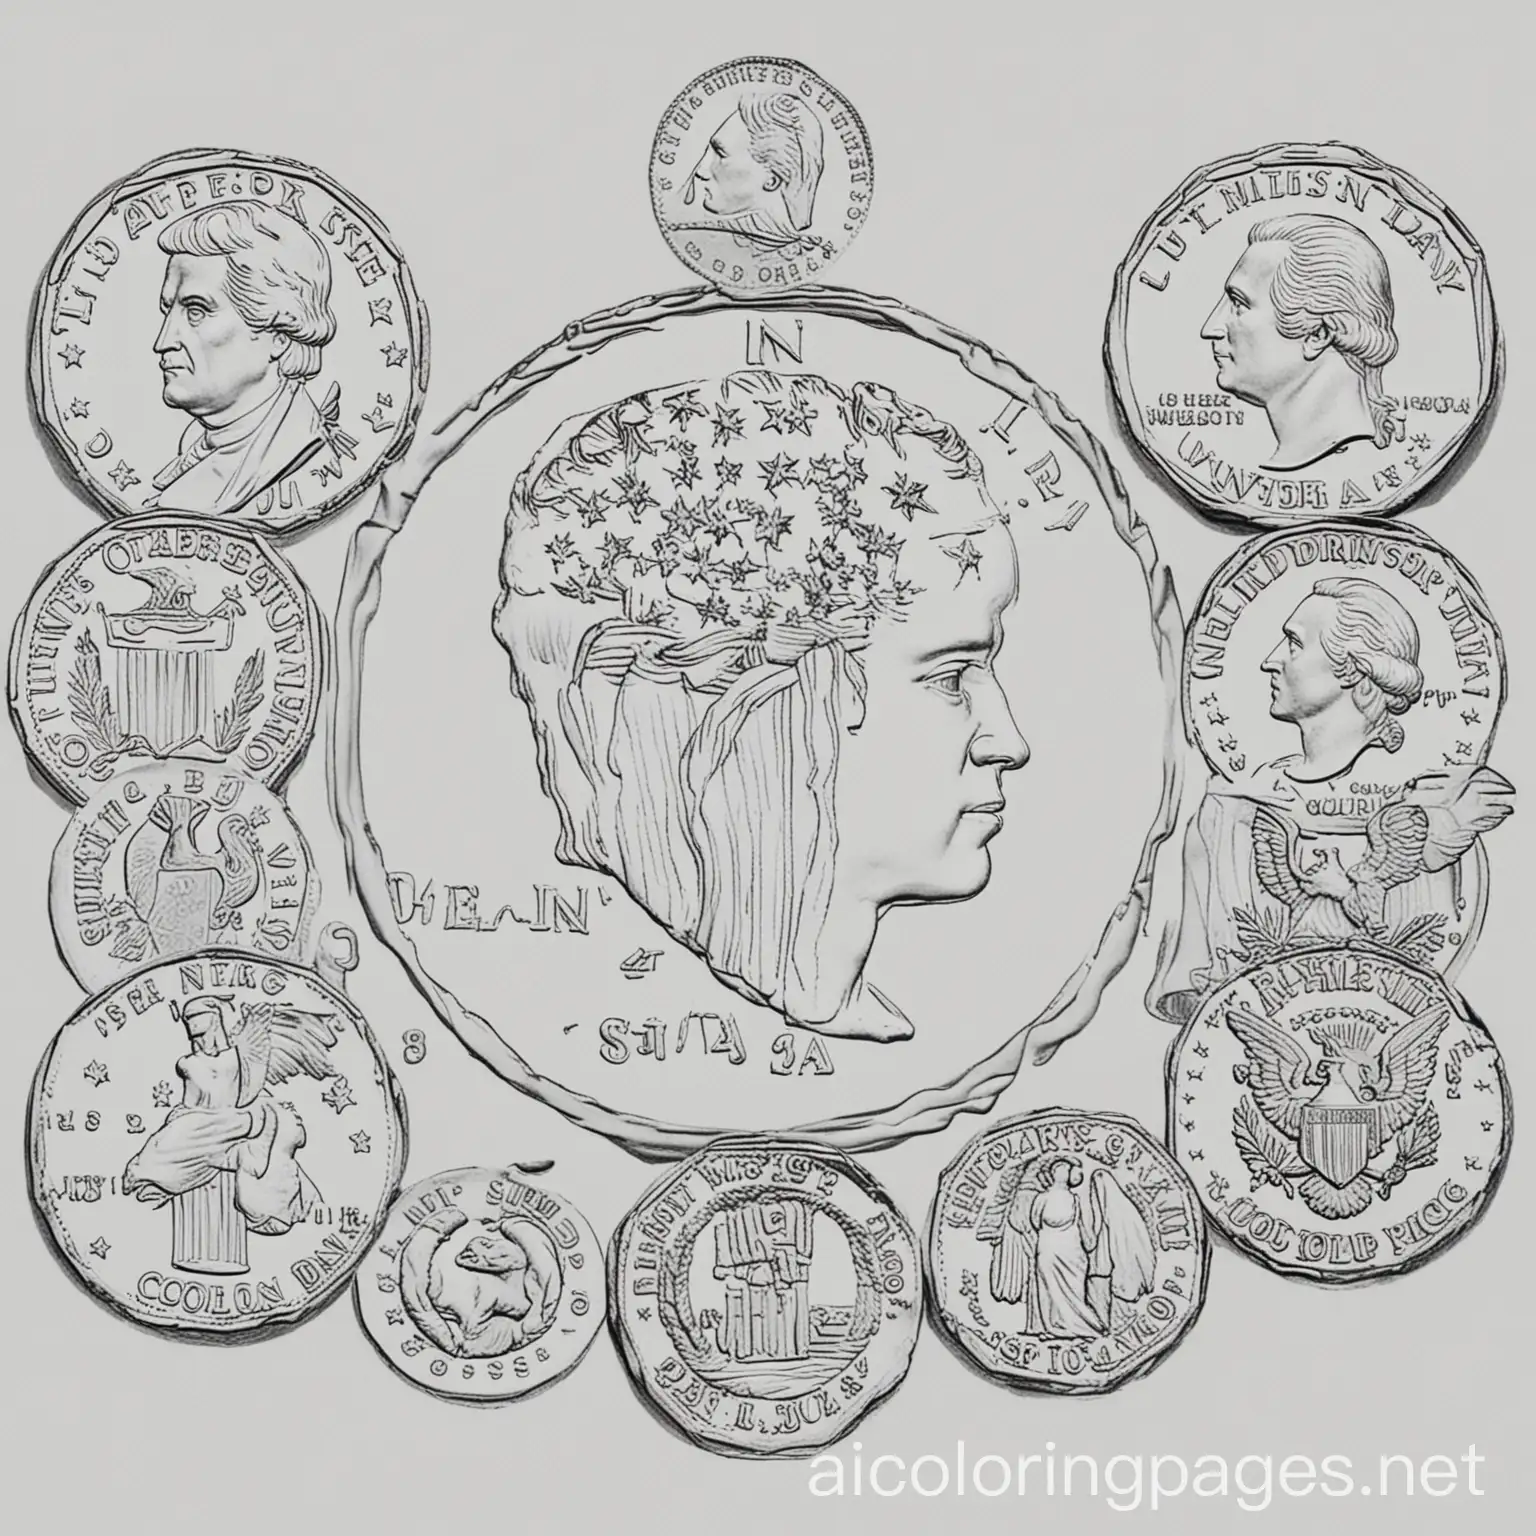 All U.S.A coins coloring with clear image to color , Coloring Page, black and white, line art, white background, Simplicity, Ample White Space. The background of the coloring page is plain white to make it easy for young children to color within the lines. The outlines of all the subjects are easy to distinguish, making it simple for kids to color without too much difficulty